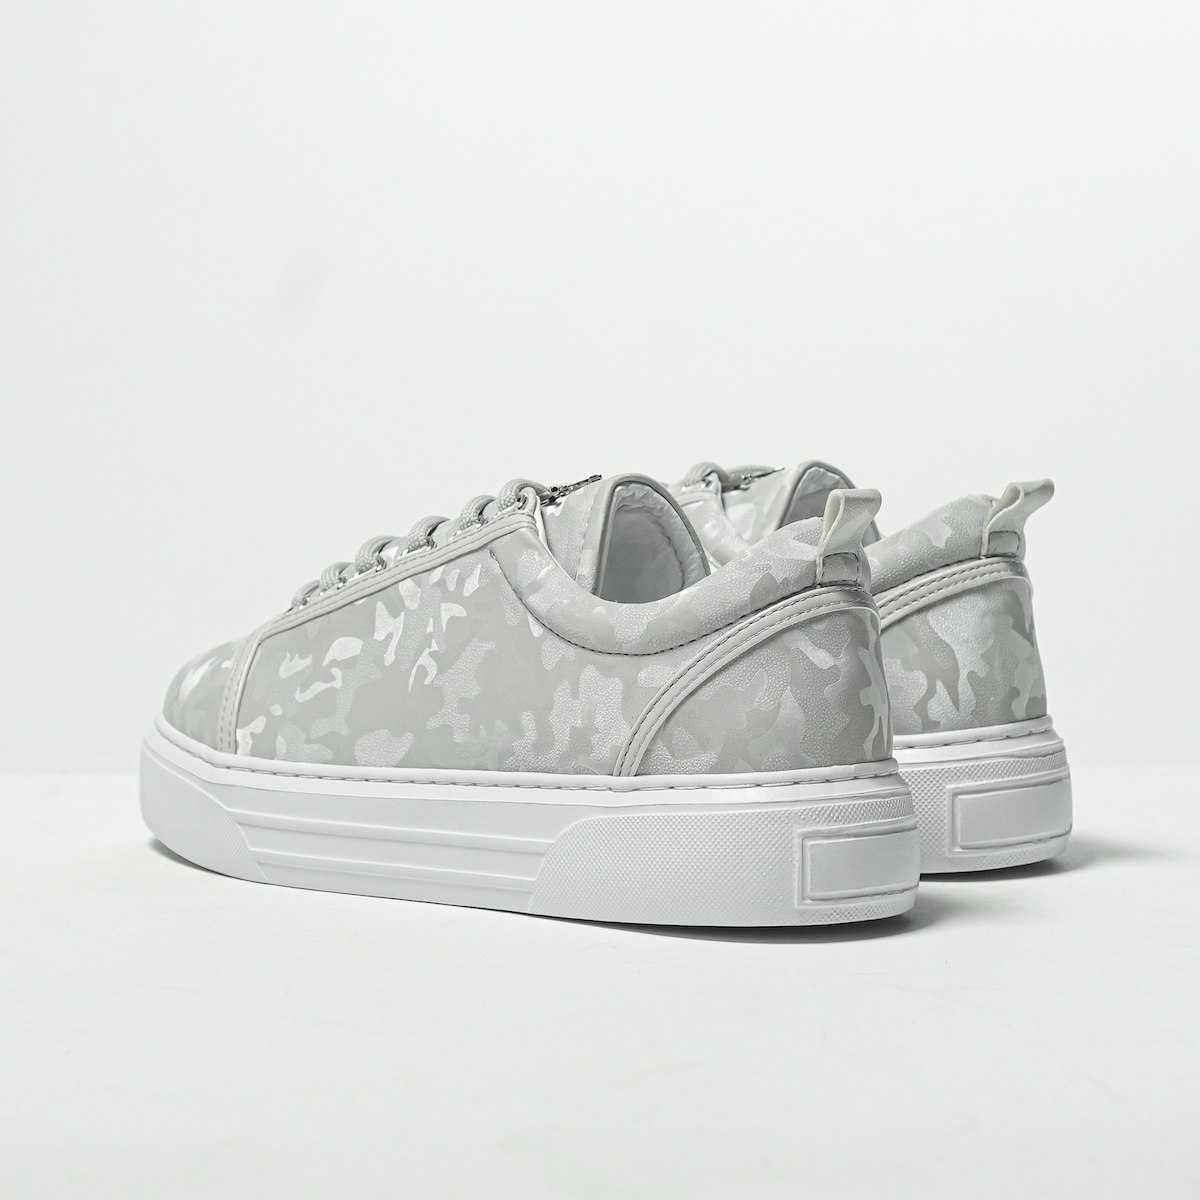 Men's Low Top Sneakers Crowned Designer Shoes Camo-White